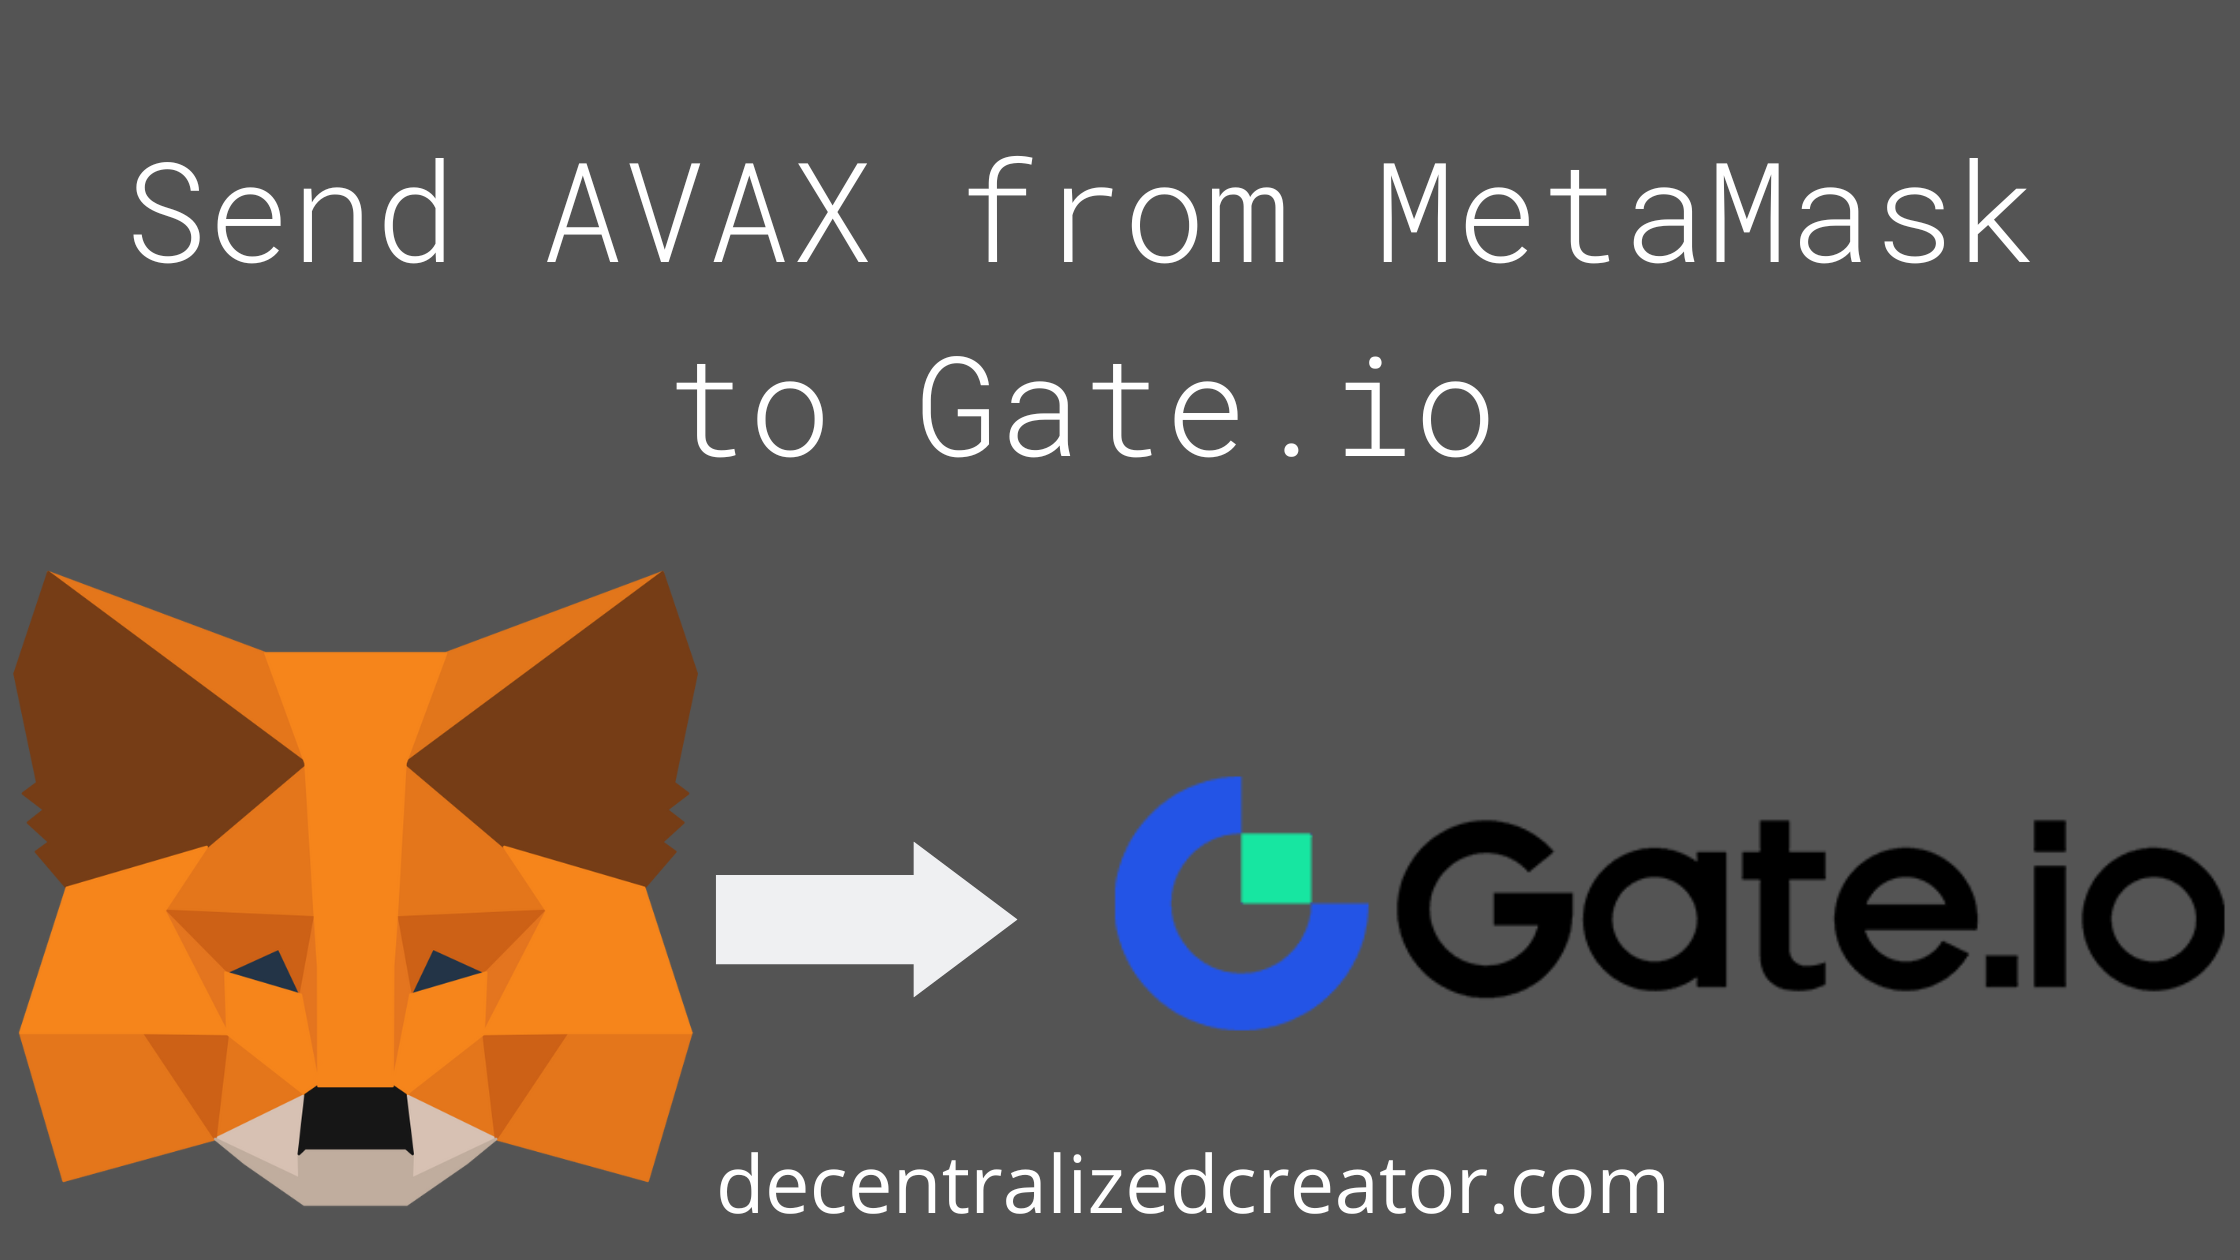 Send AVAX from MetaMask to Gate.io